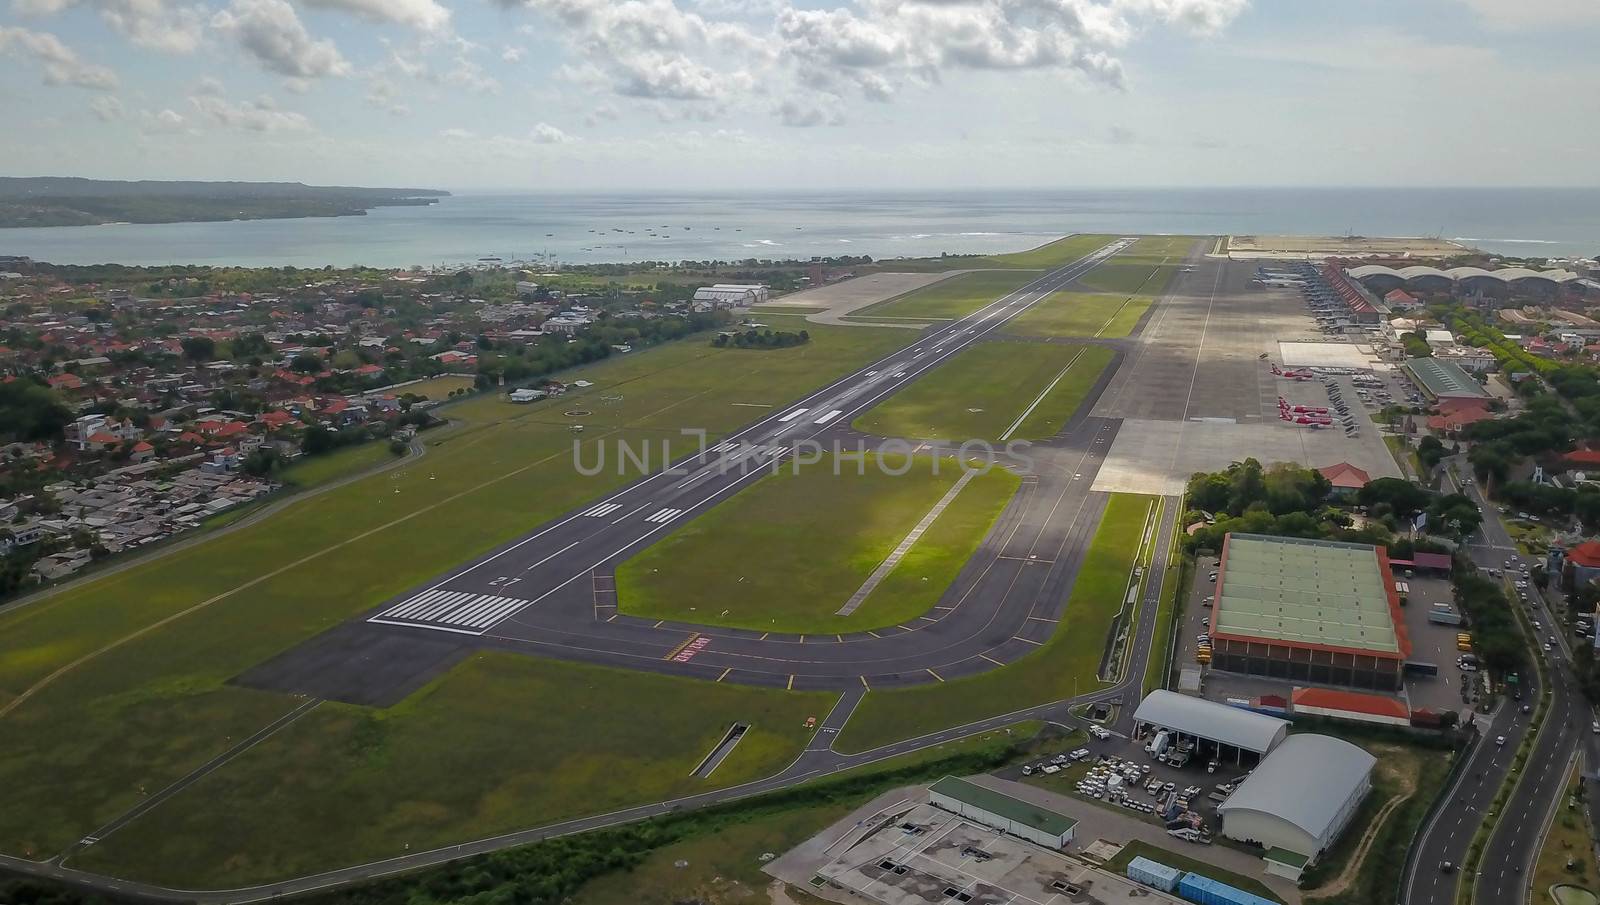 A view of Bali island after aircraft has been taken off from Ngurah Rai International airport. Runway reaching into the ocean. Aerial view to international airport in Denpasar by Sanatana2008